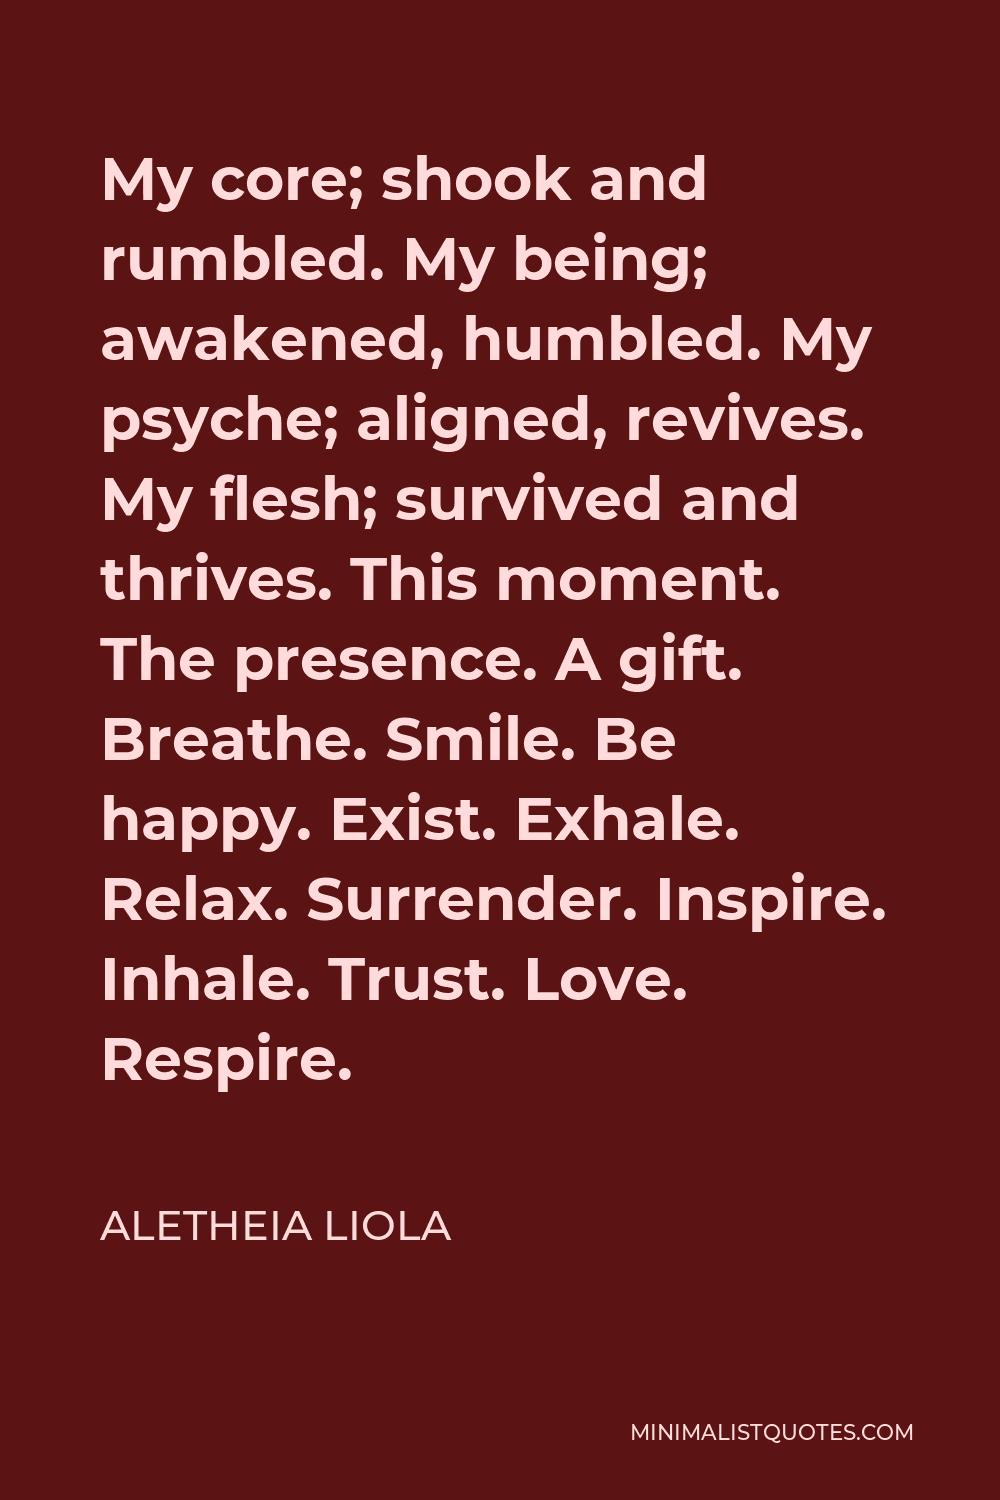 Aletheia Liola Quote - My core; shook and rumbled. My being; awakened, humbled. My psyche; aligned, revives. My flesh; survived and thrives. This moment. The presence. A gift. Breathe. Smile. Be happy. Exist. Exhale. Relax. Surrender. Inspire. Inhale. Trust. Love. Respire.